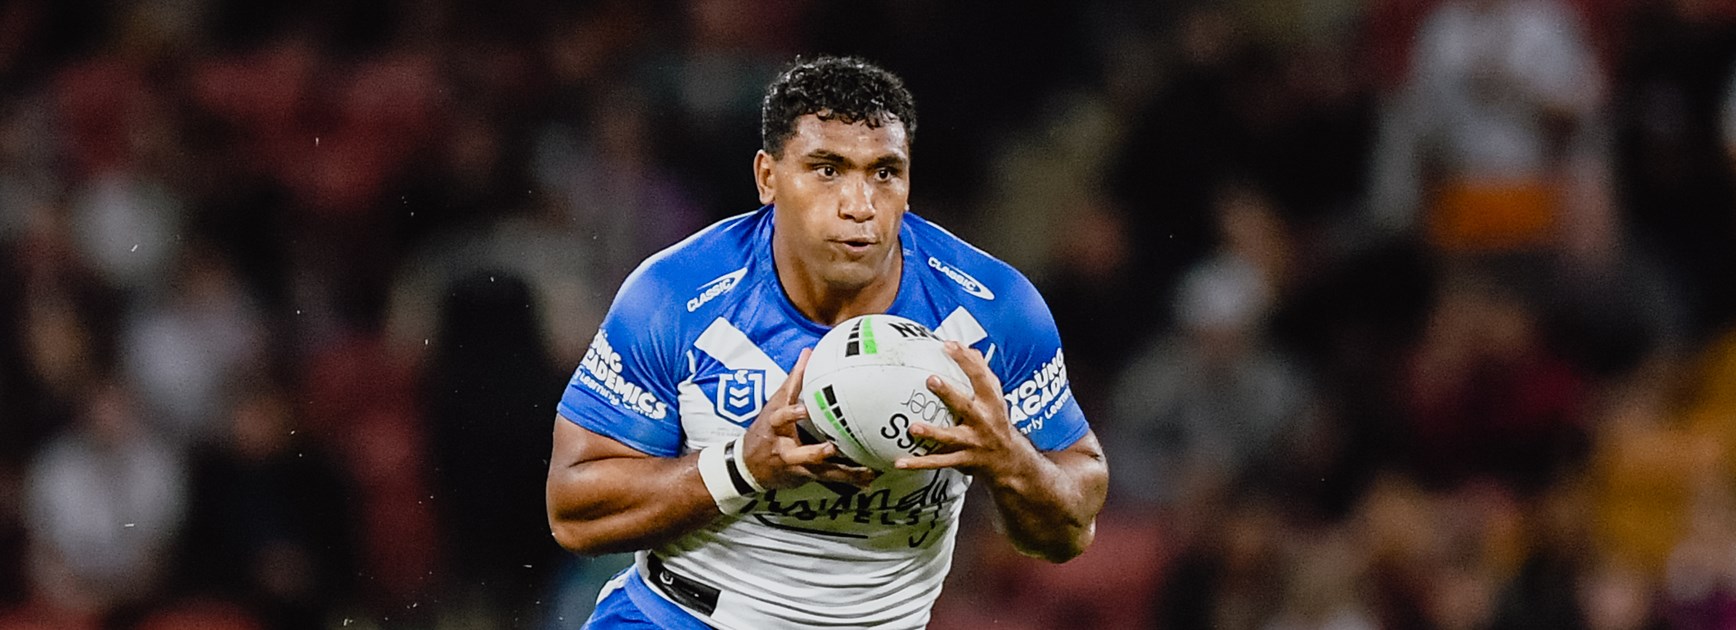 Team List Round 12: Line-up confirmed for Dragons Indigenous Round clash